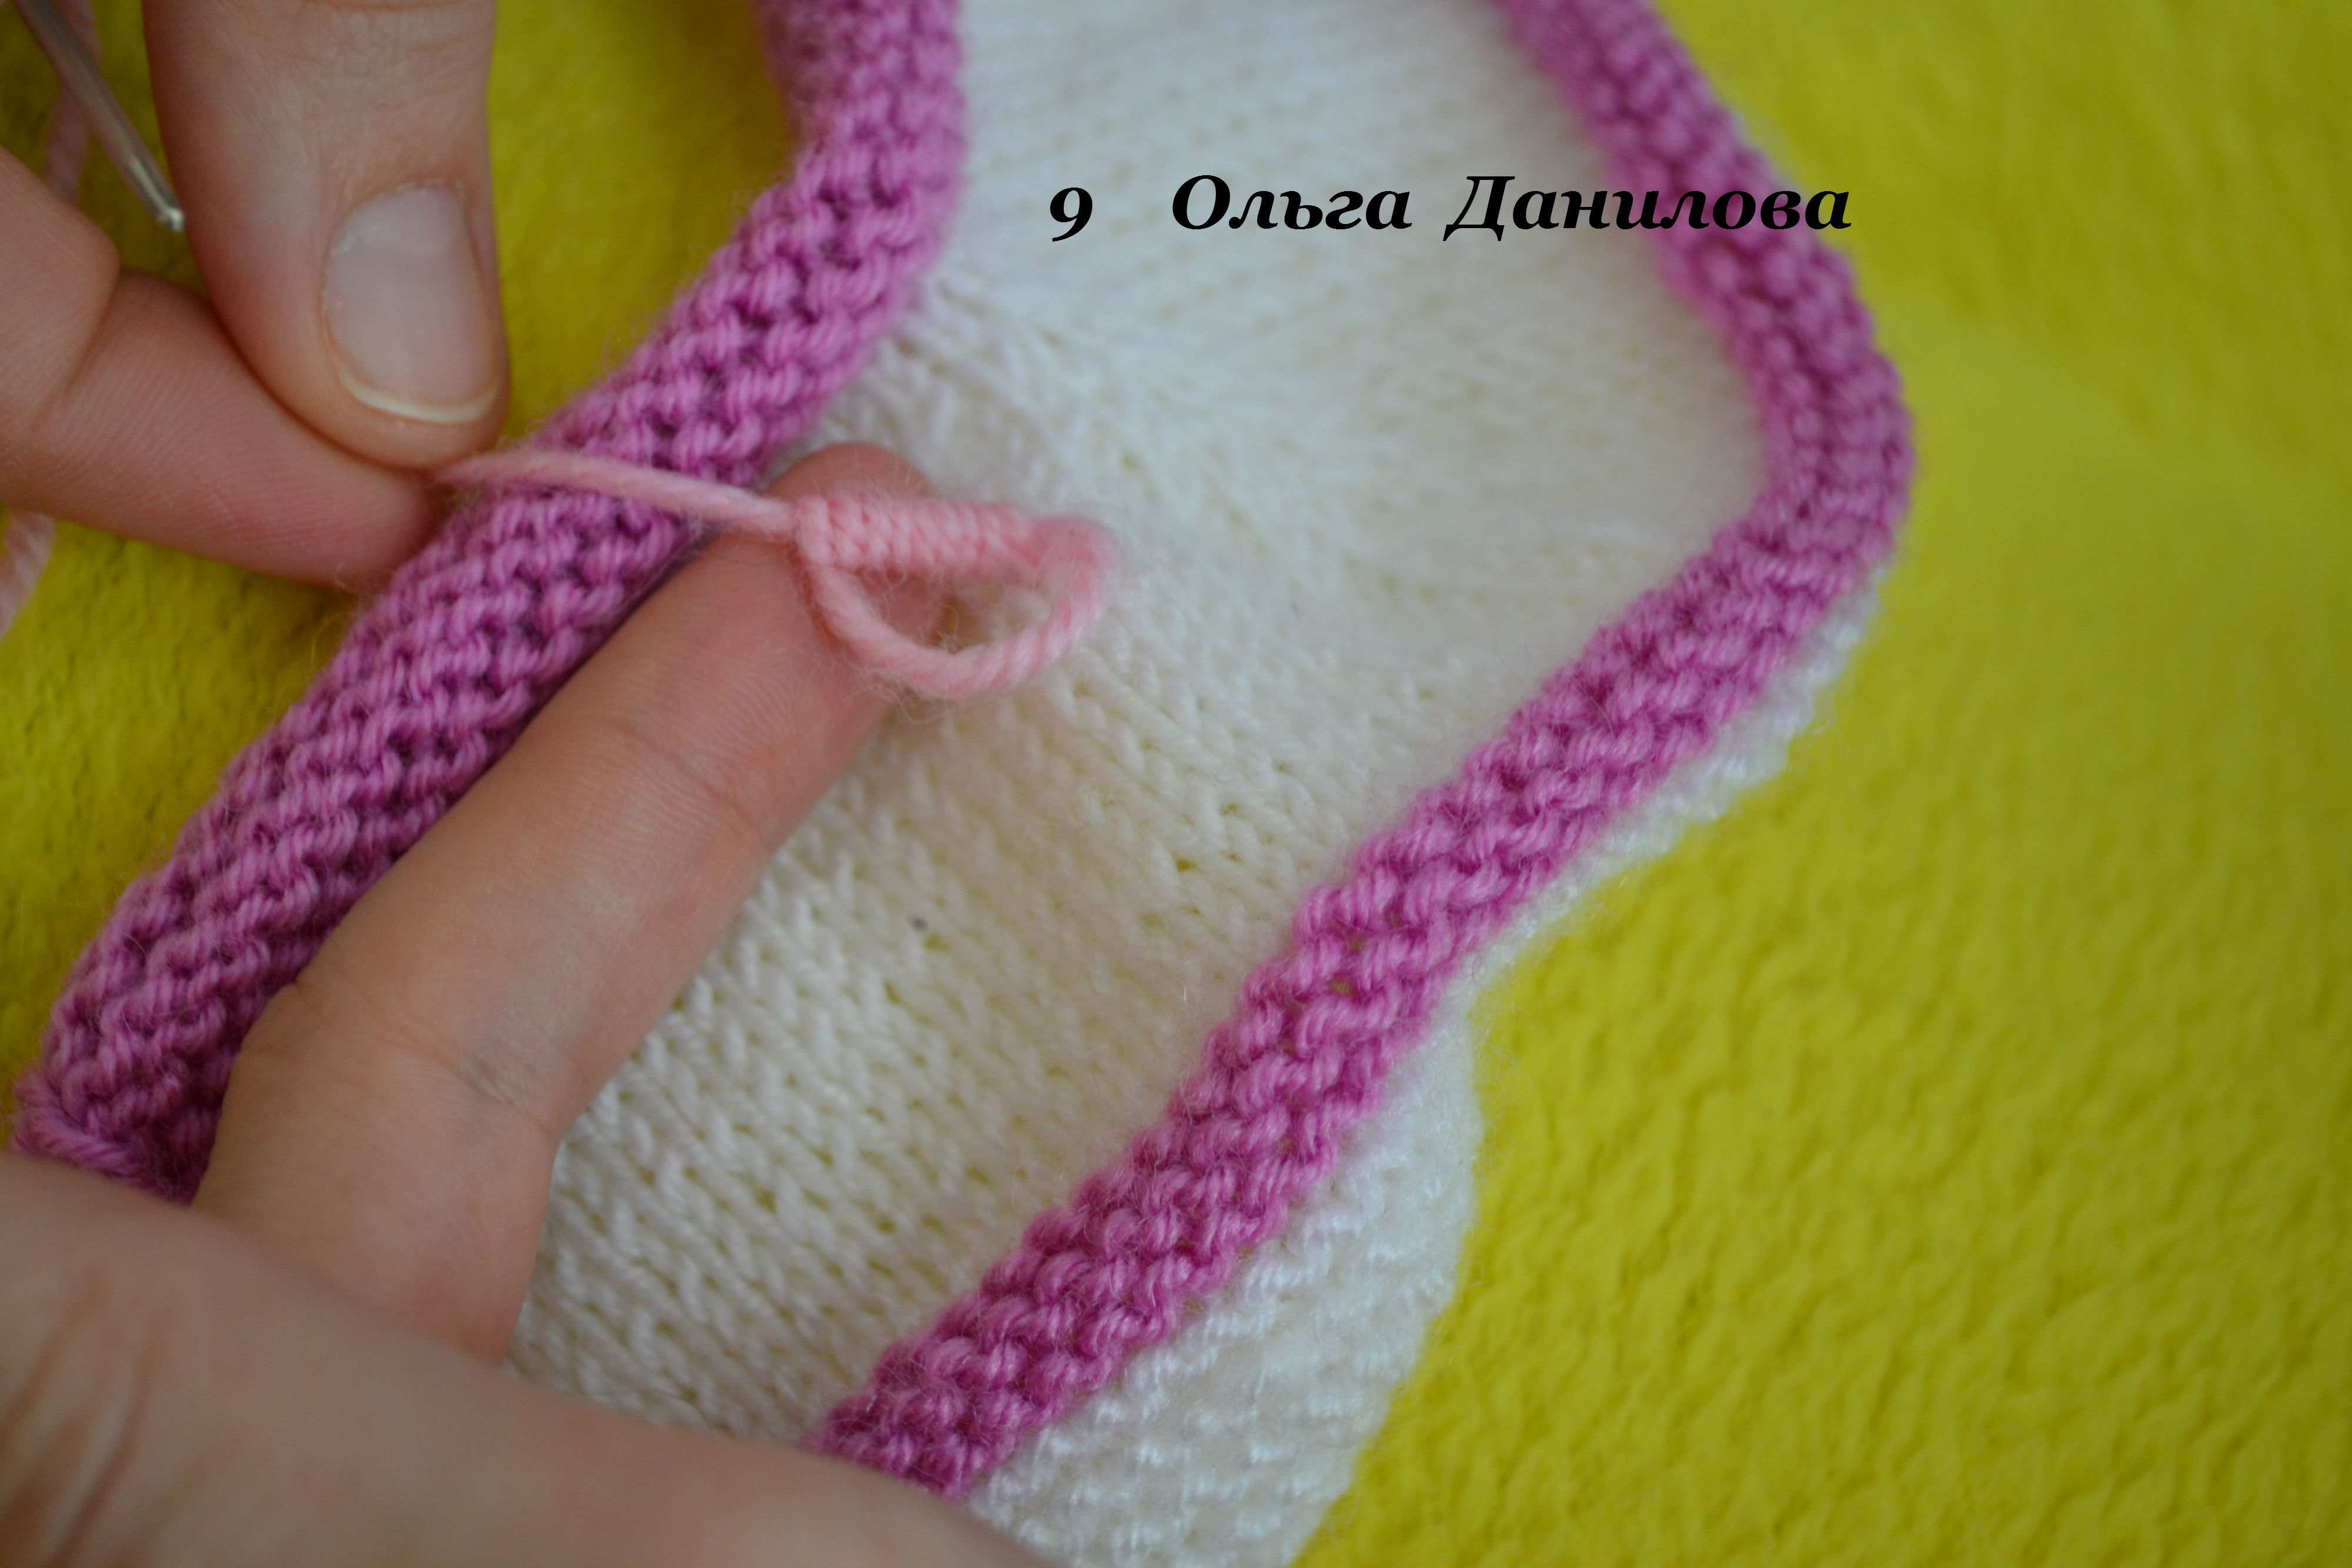 How-to-Make-Pretty-Knitted-Baby-Booties-11.jpg